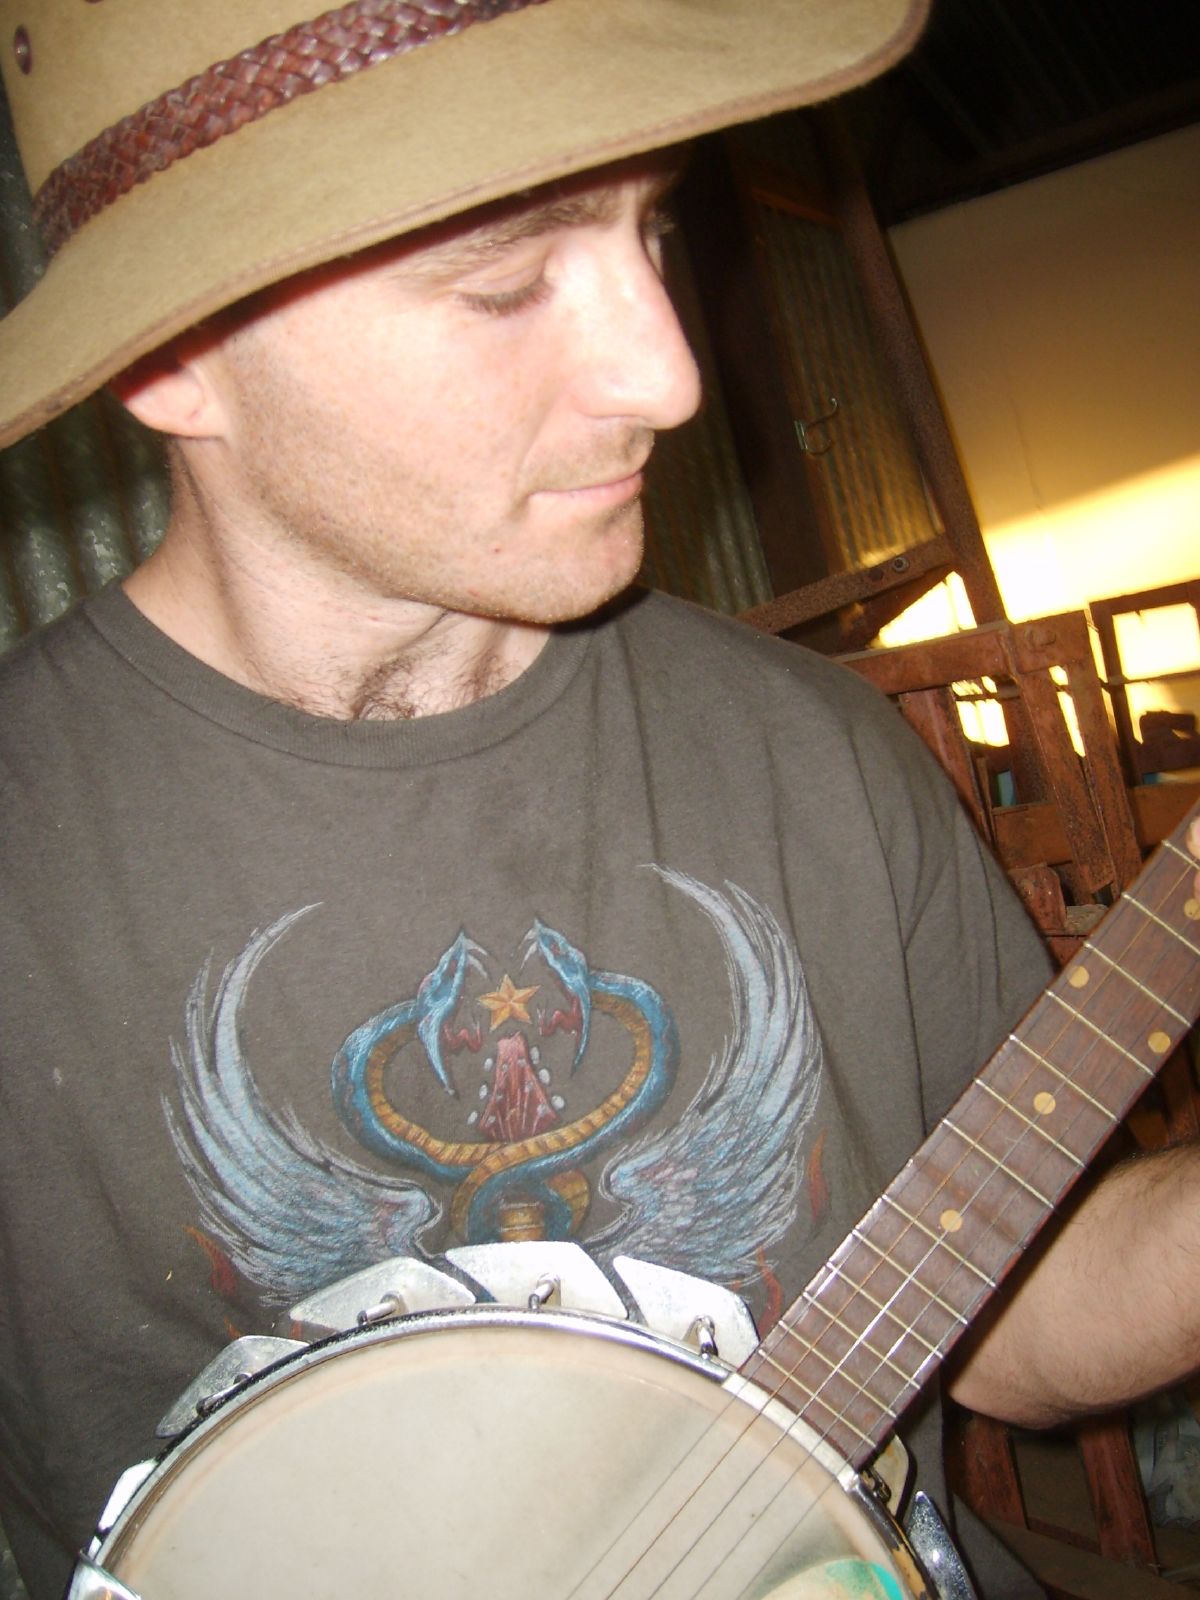 a man with a hat is playing a guitar